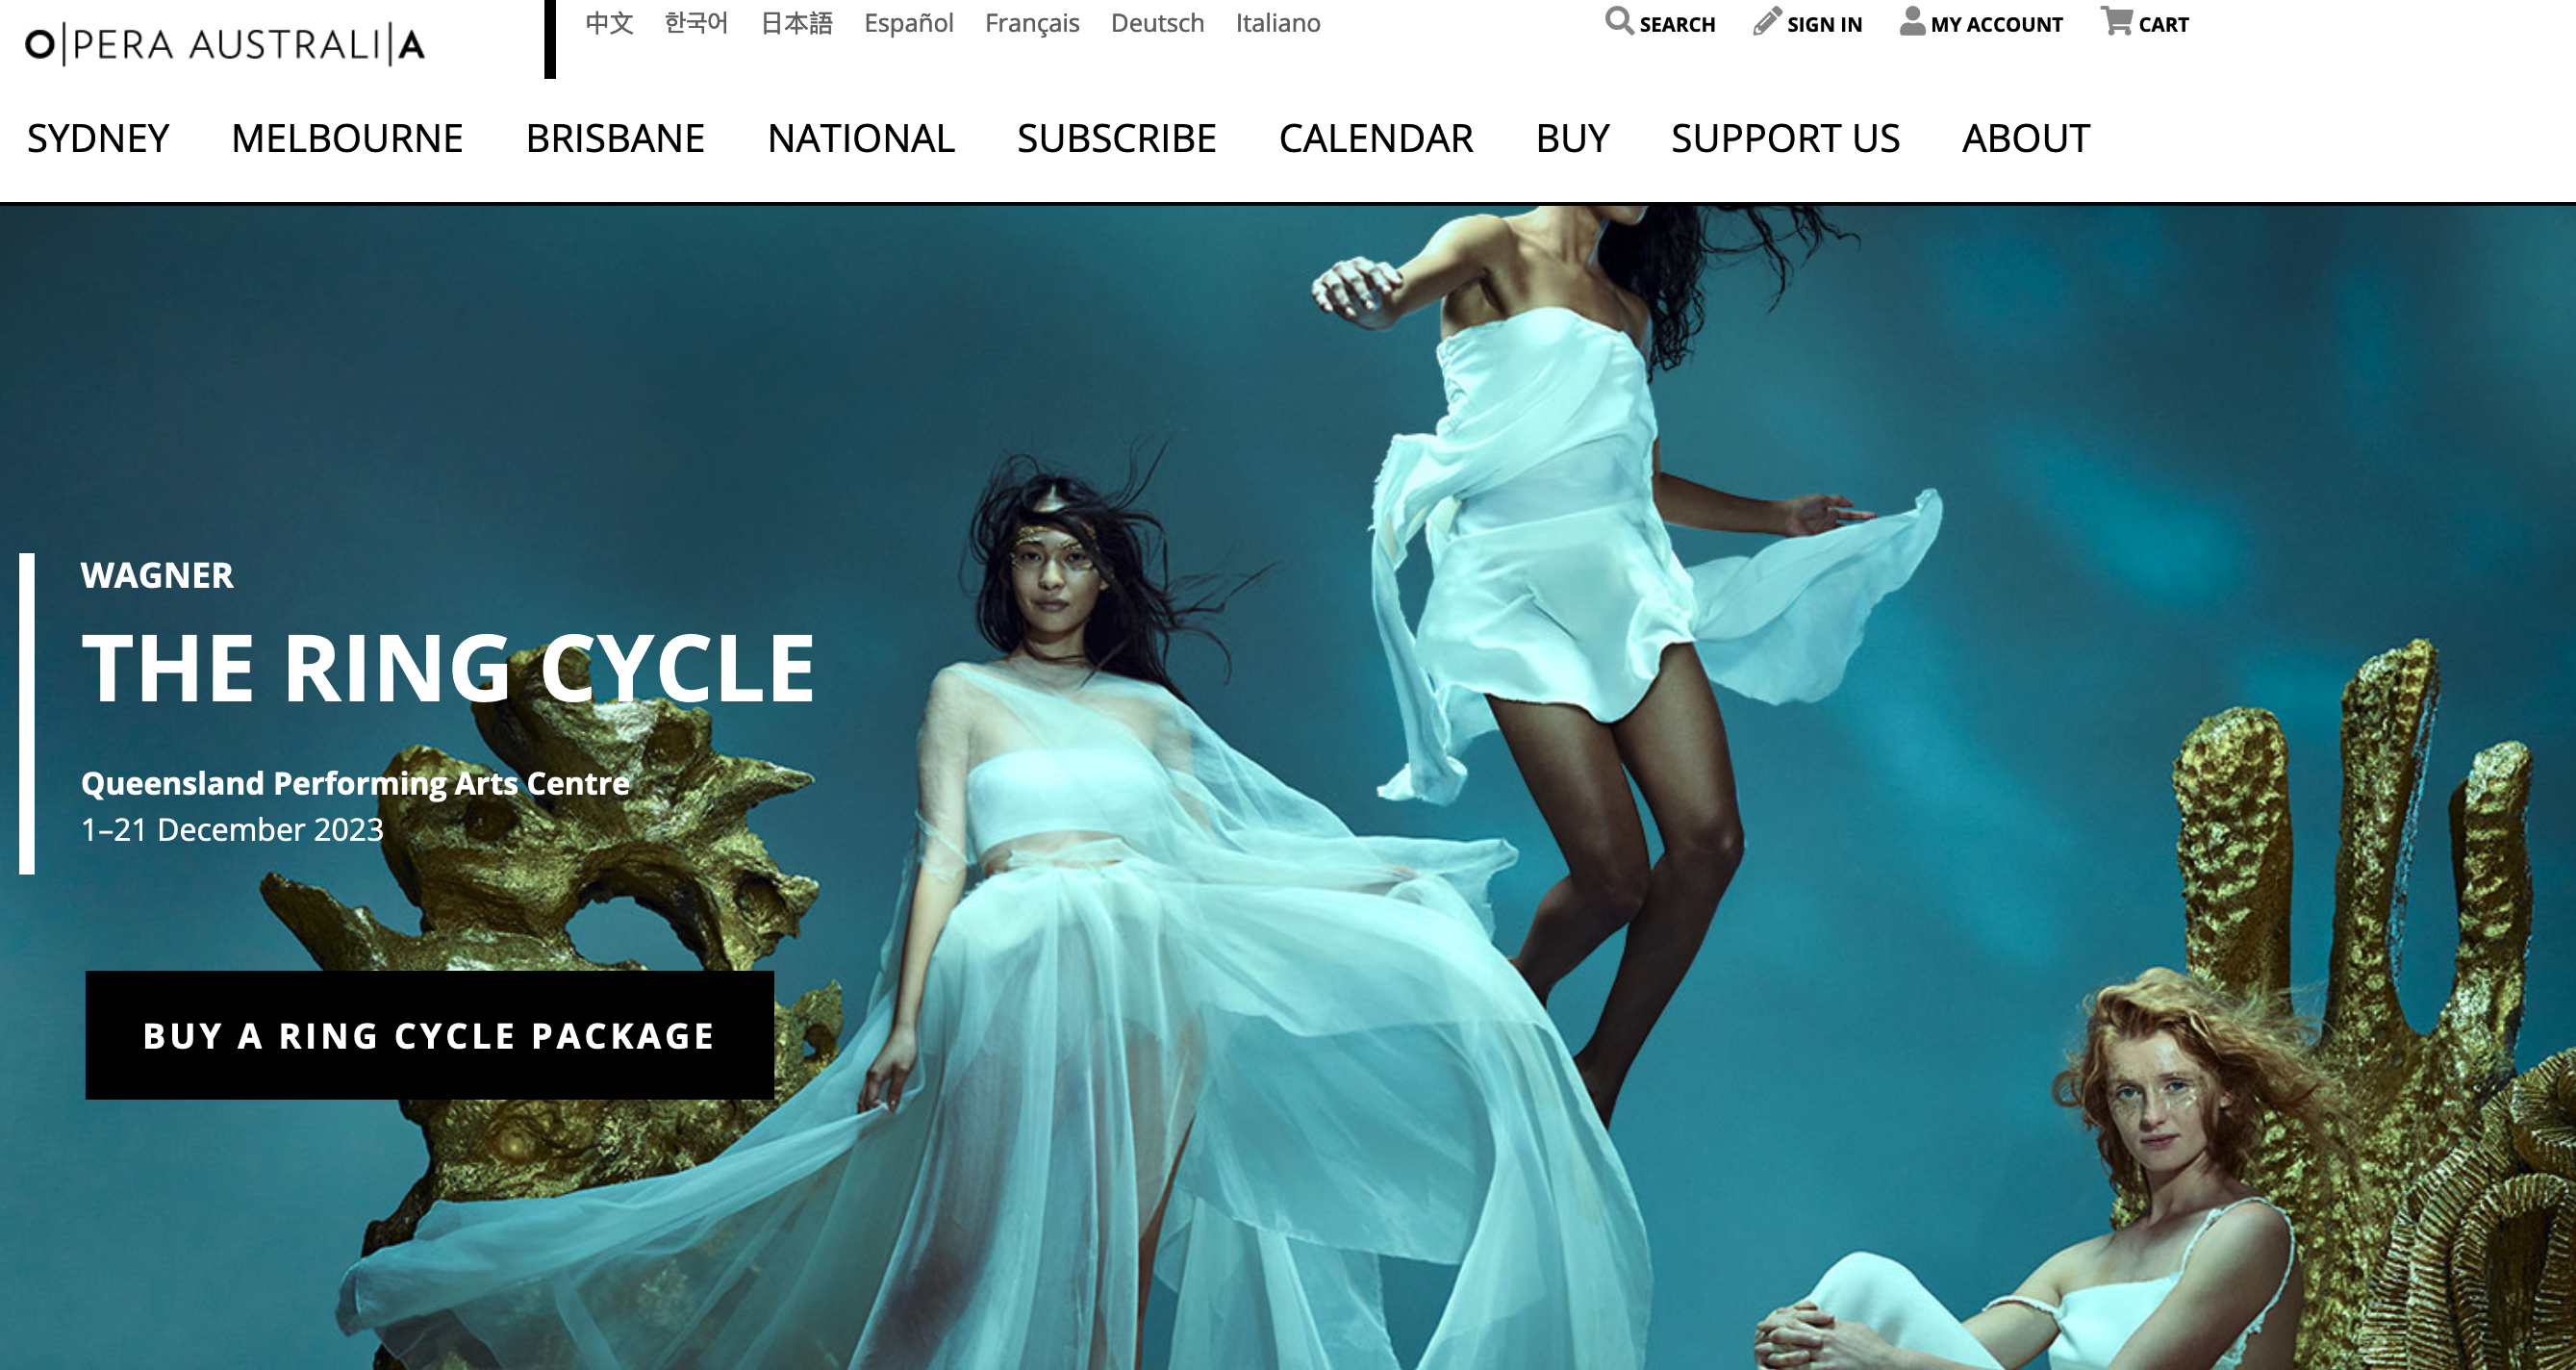 A screen grab of the Opera Australia website advertising the upcoming Wagner Ring Cycle. The three Rhine maidens in flowing white gowns are posed.